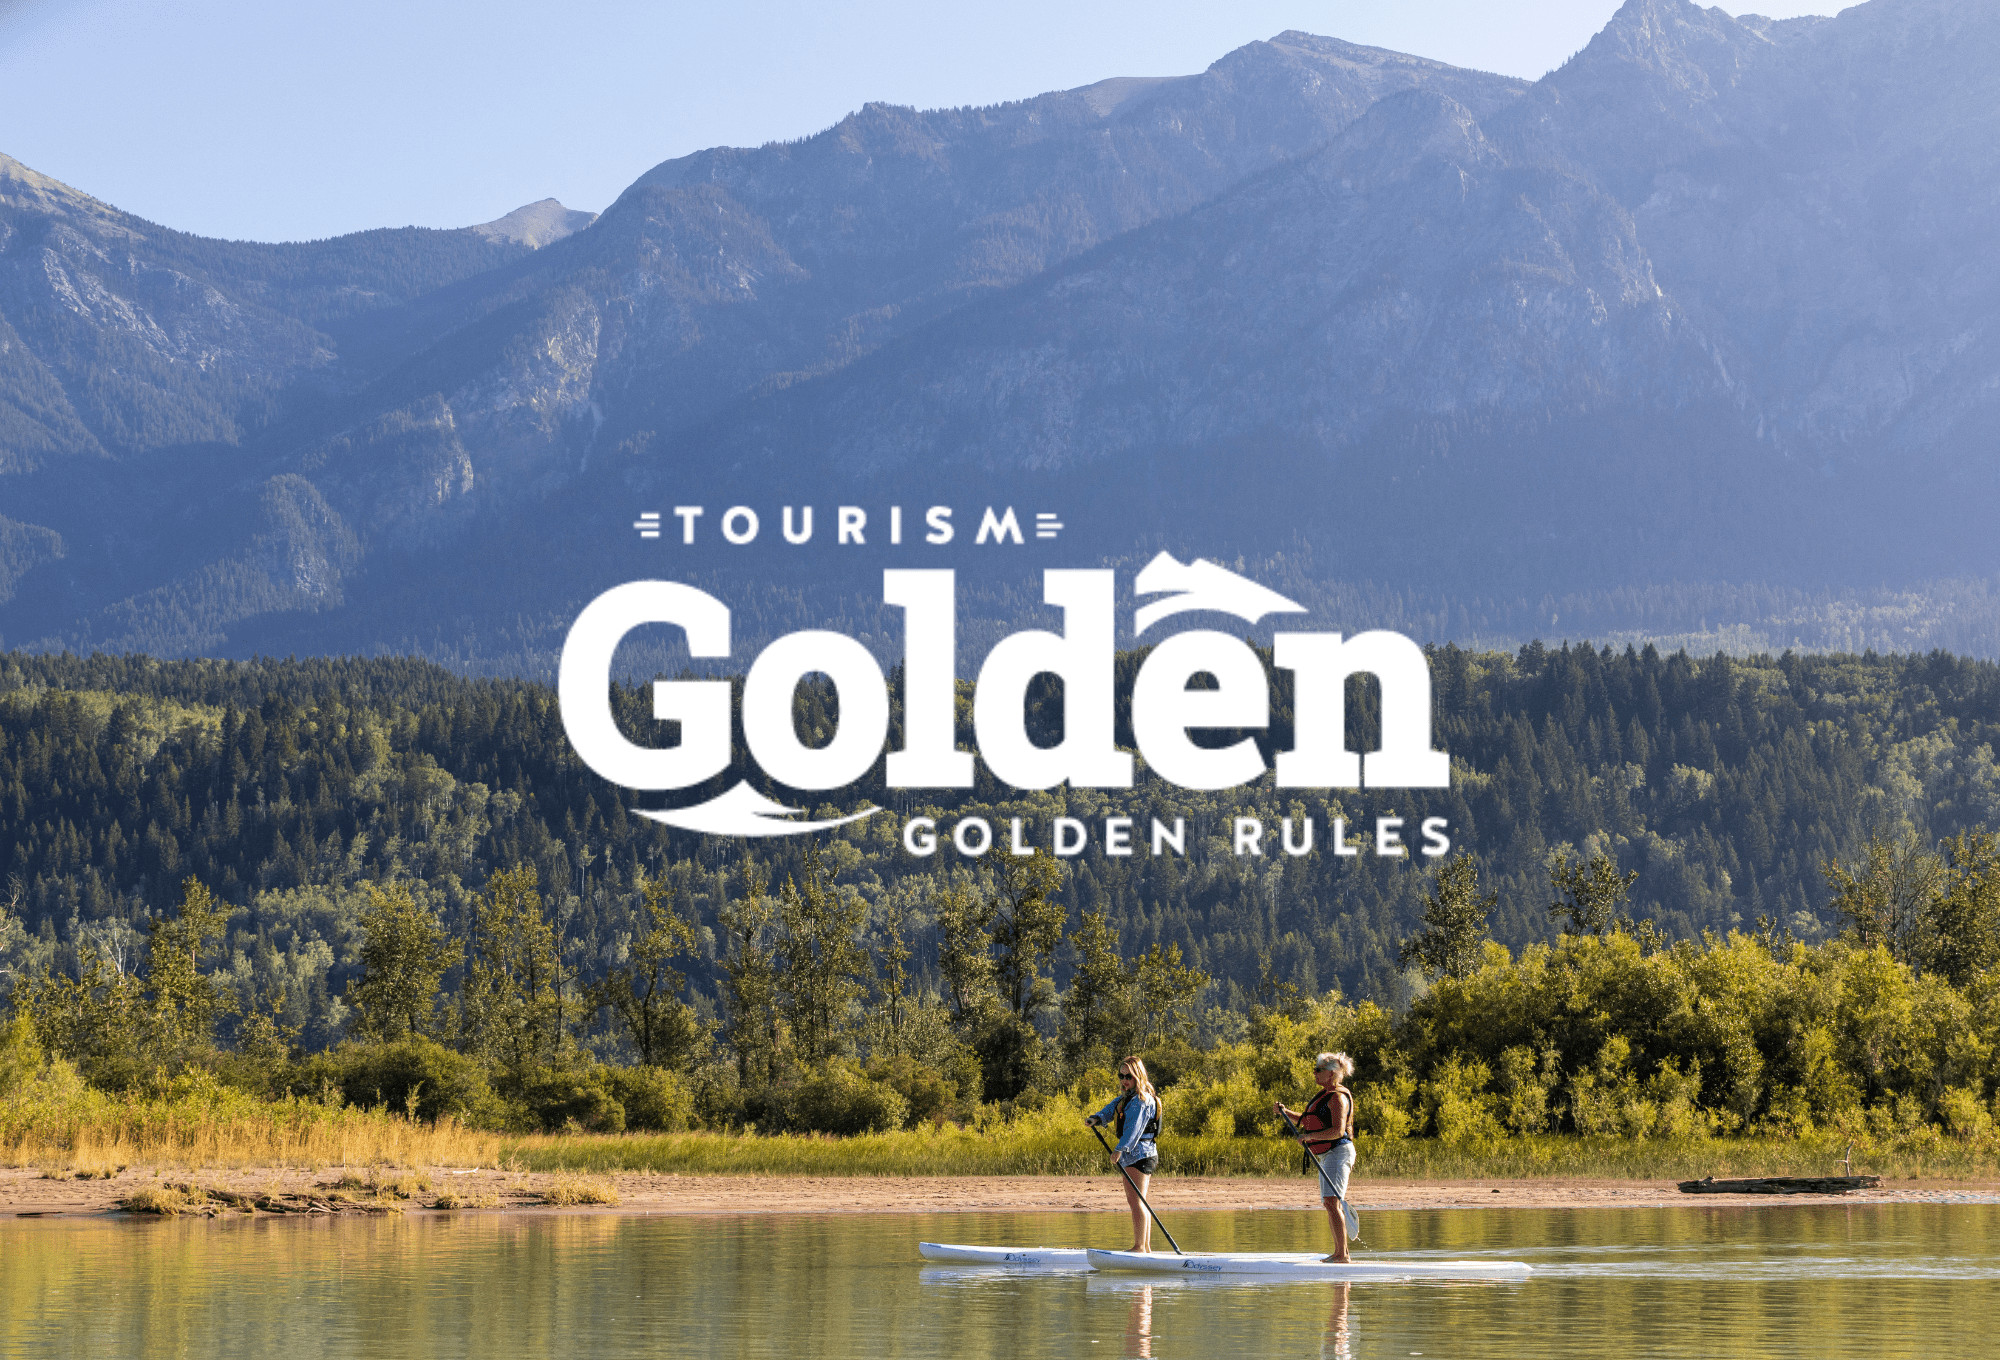 Get into BC Golden